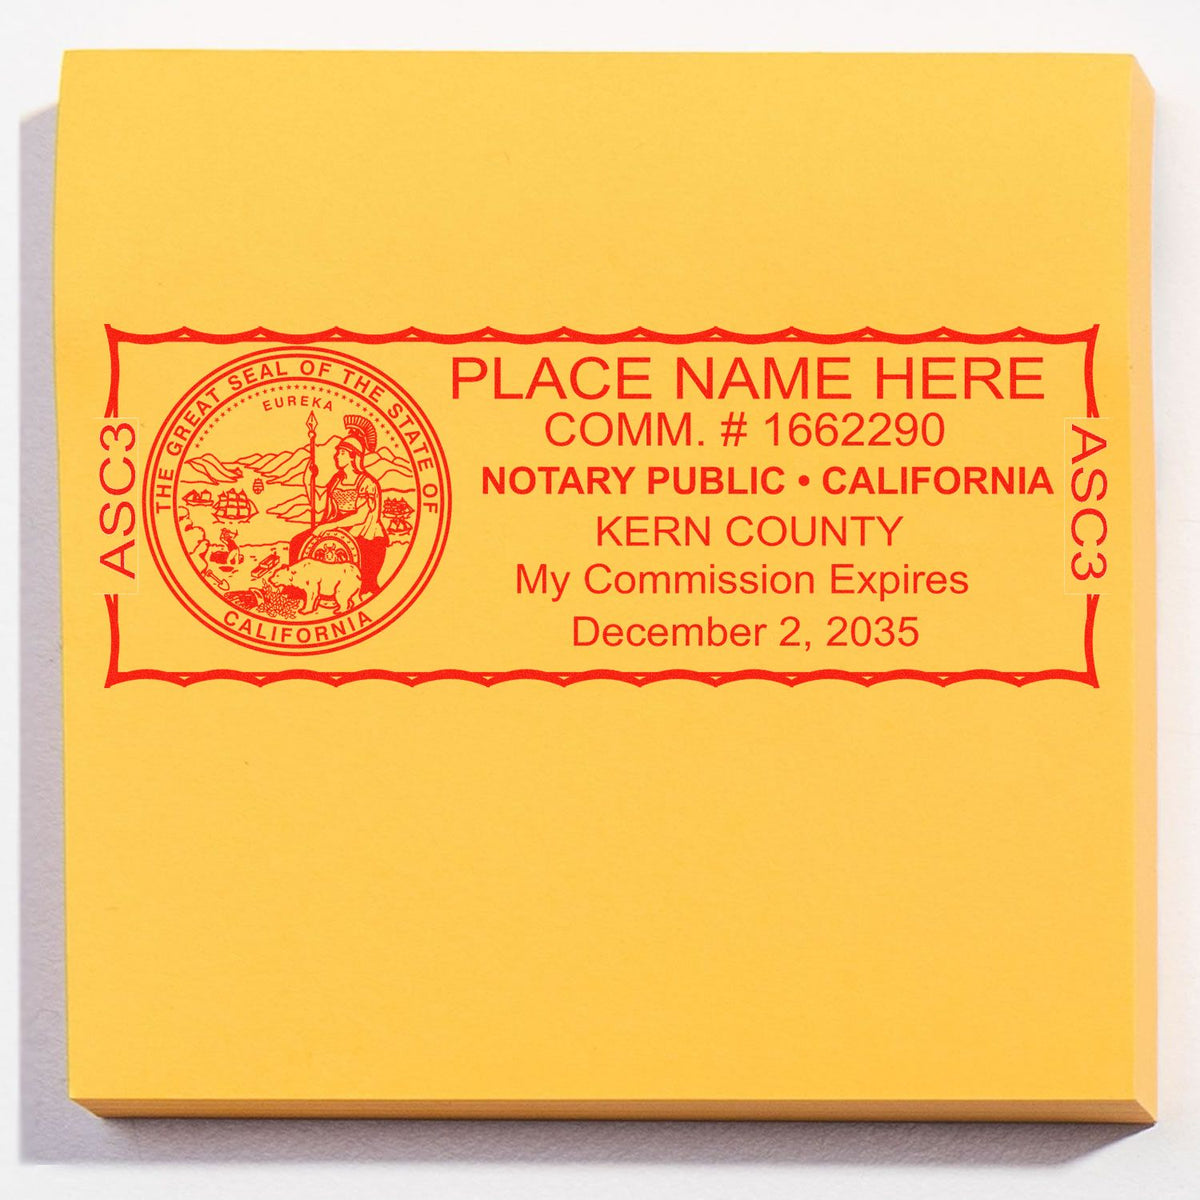 An alternative view of the MaxLight Premium Pre-Inked California State Seal Notarial Stamp stamped on a sheet of paper showing the image in use